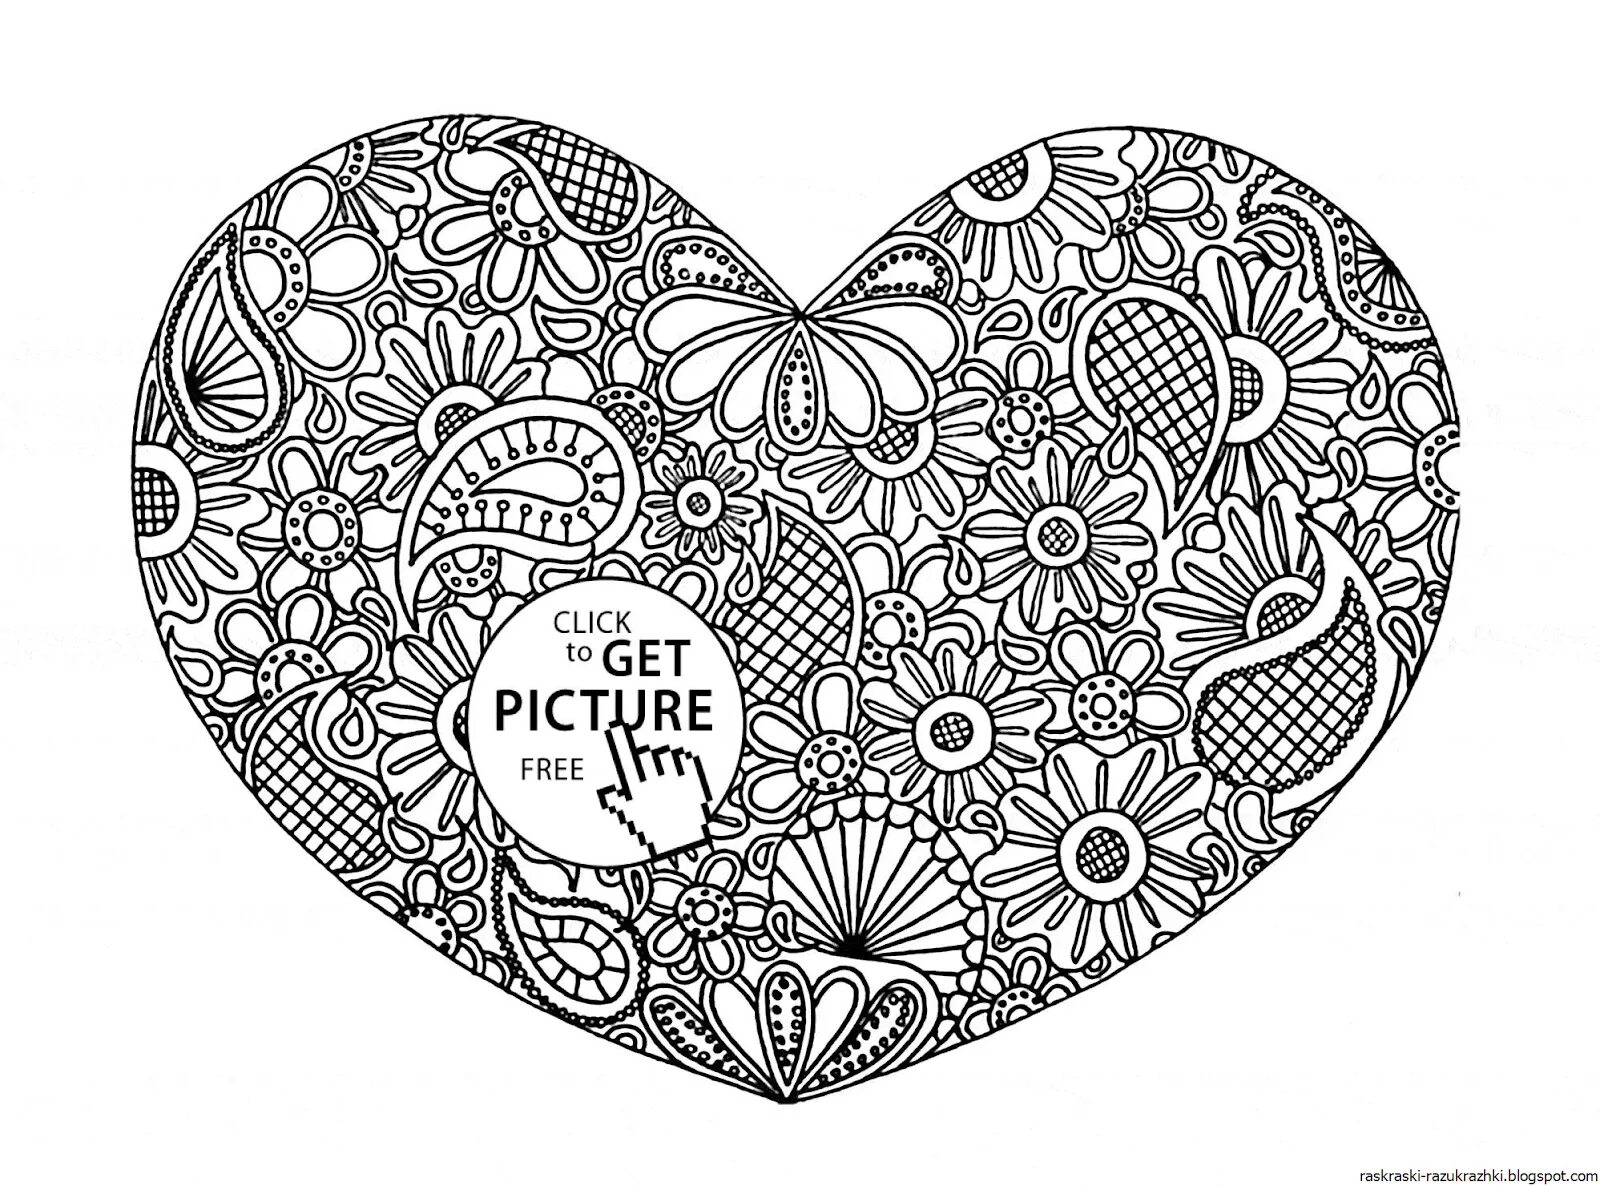 Hypnotic anti-stress coloring book for markers